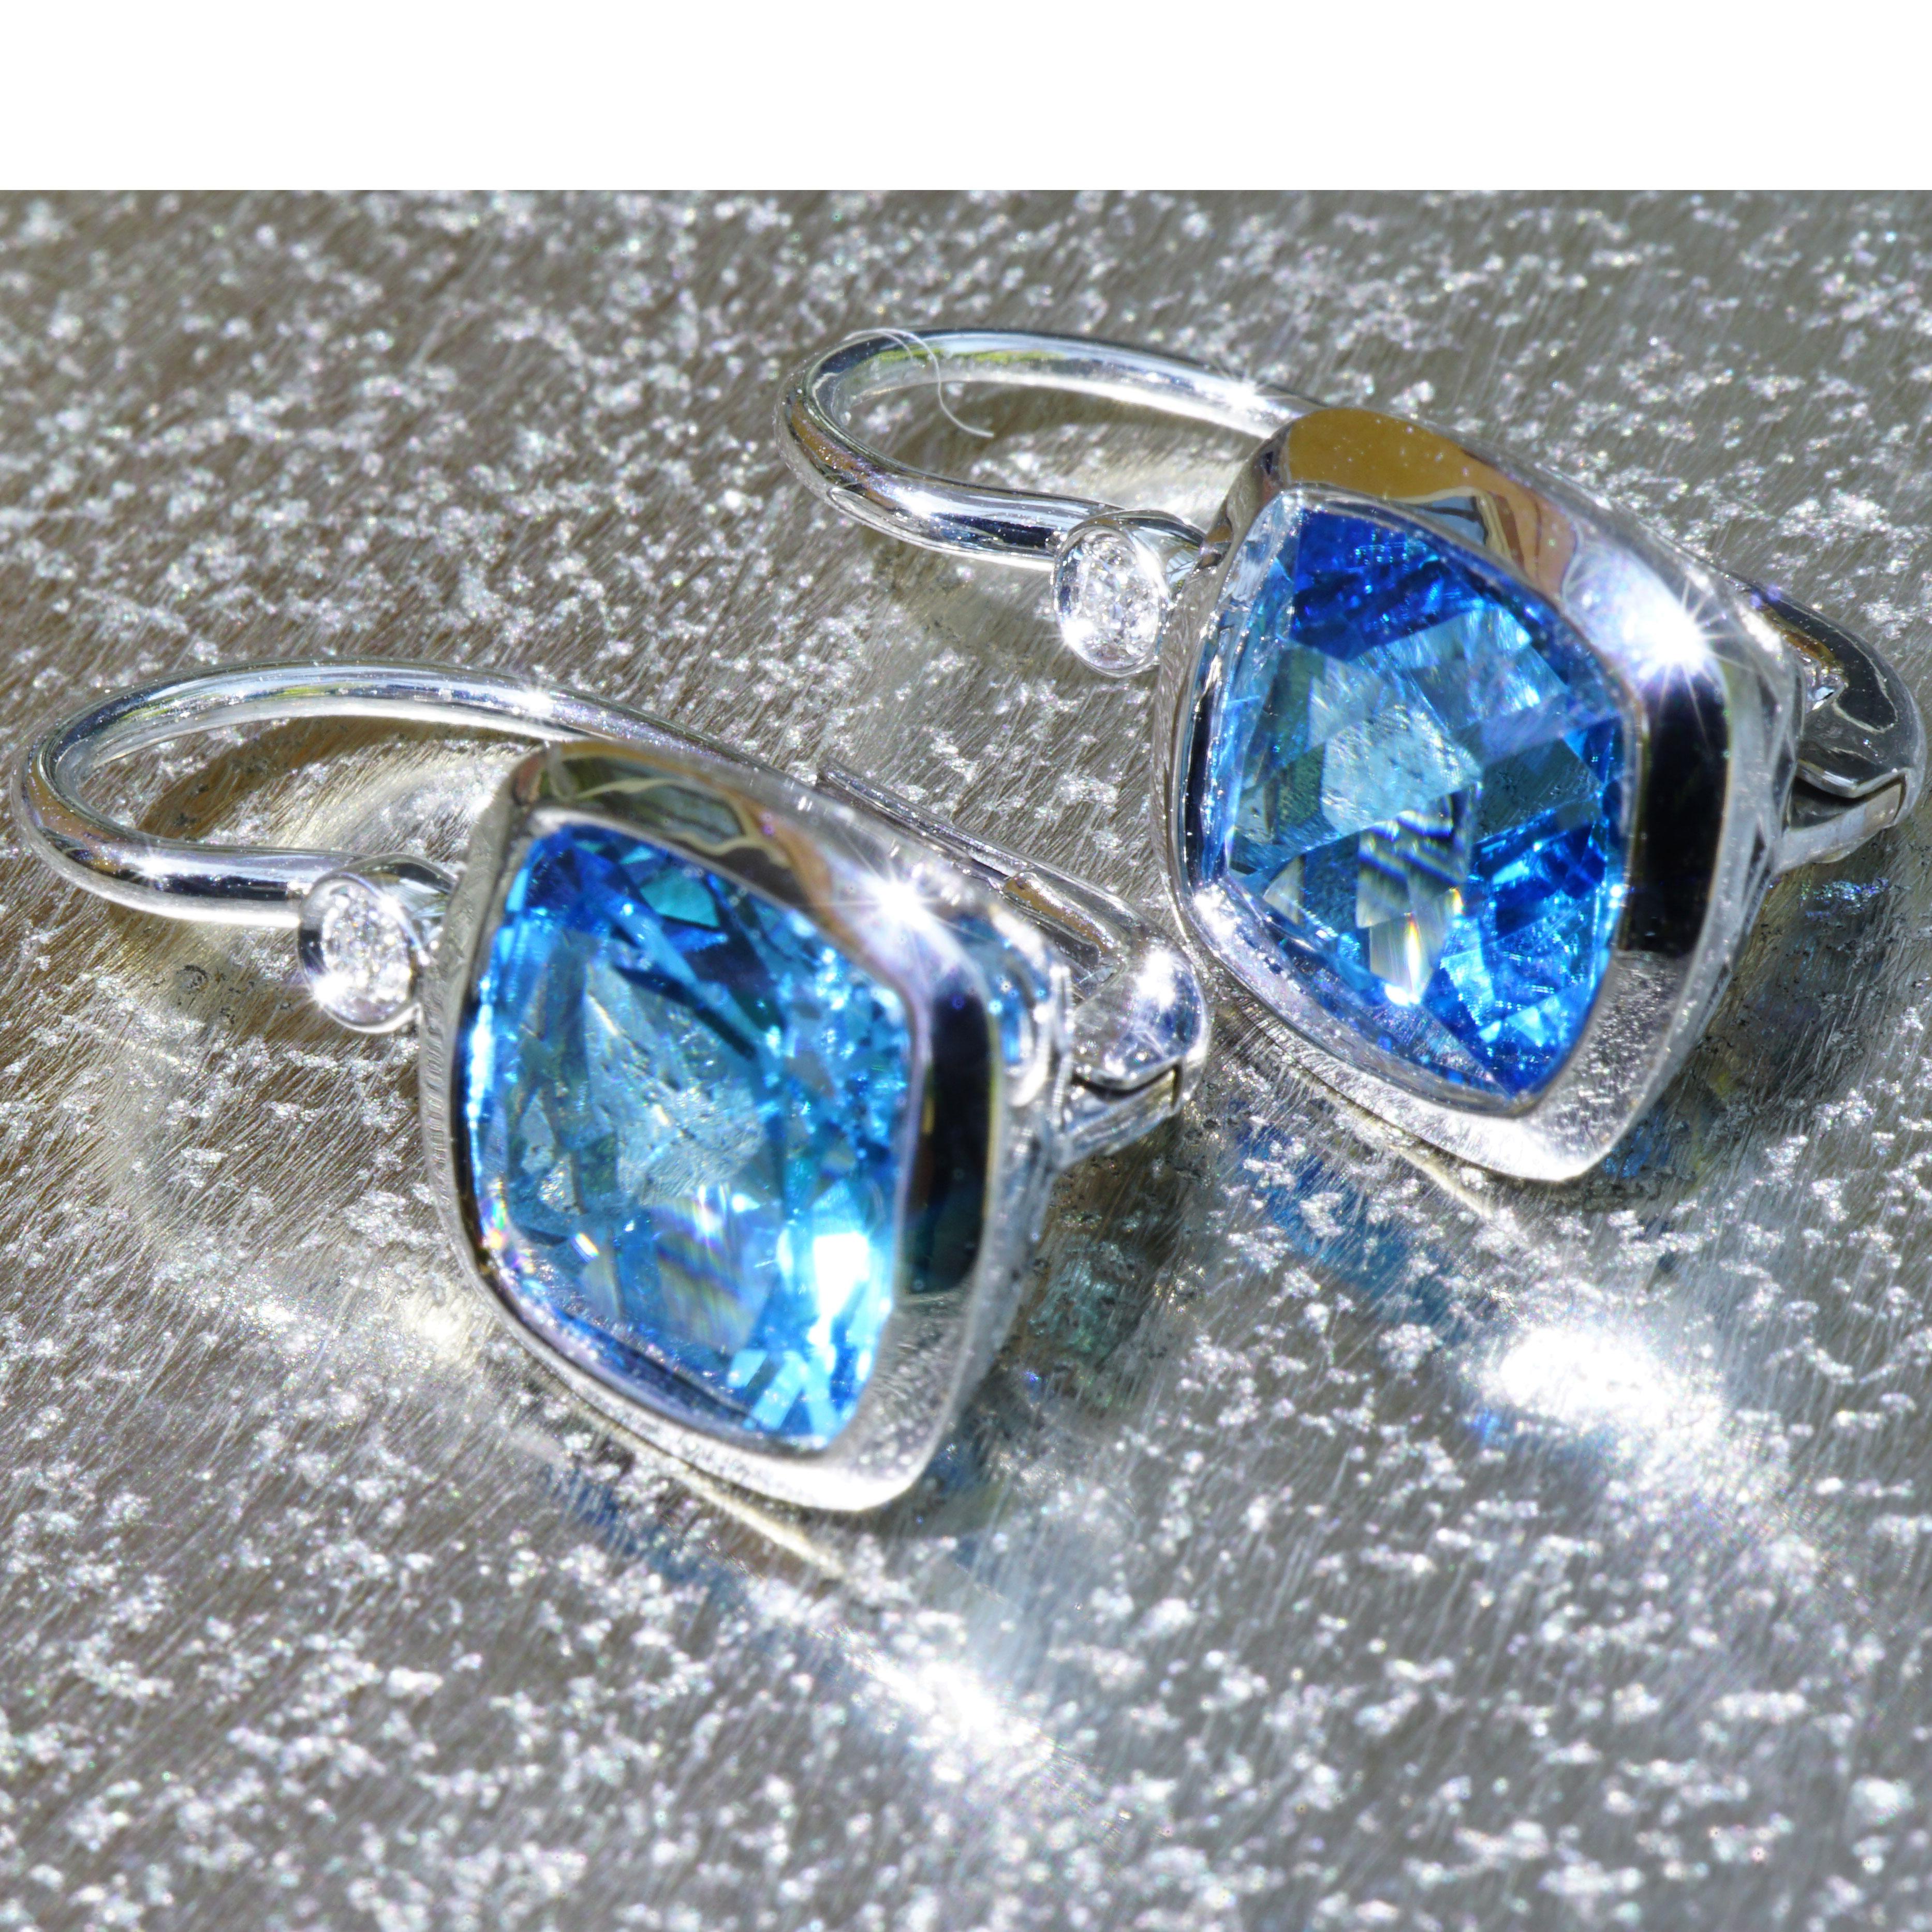 Blue Topaz and Diamonds Earrings Very Modern Setting High End Italian Jewellery  In New Condition For Sale In Viena, Viena